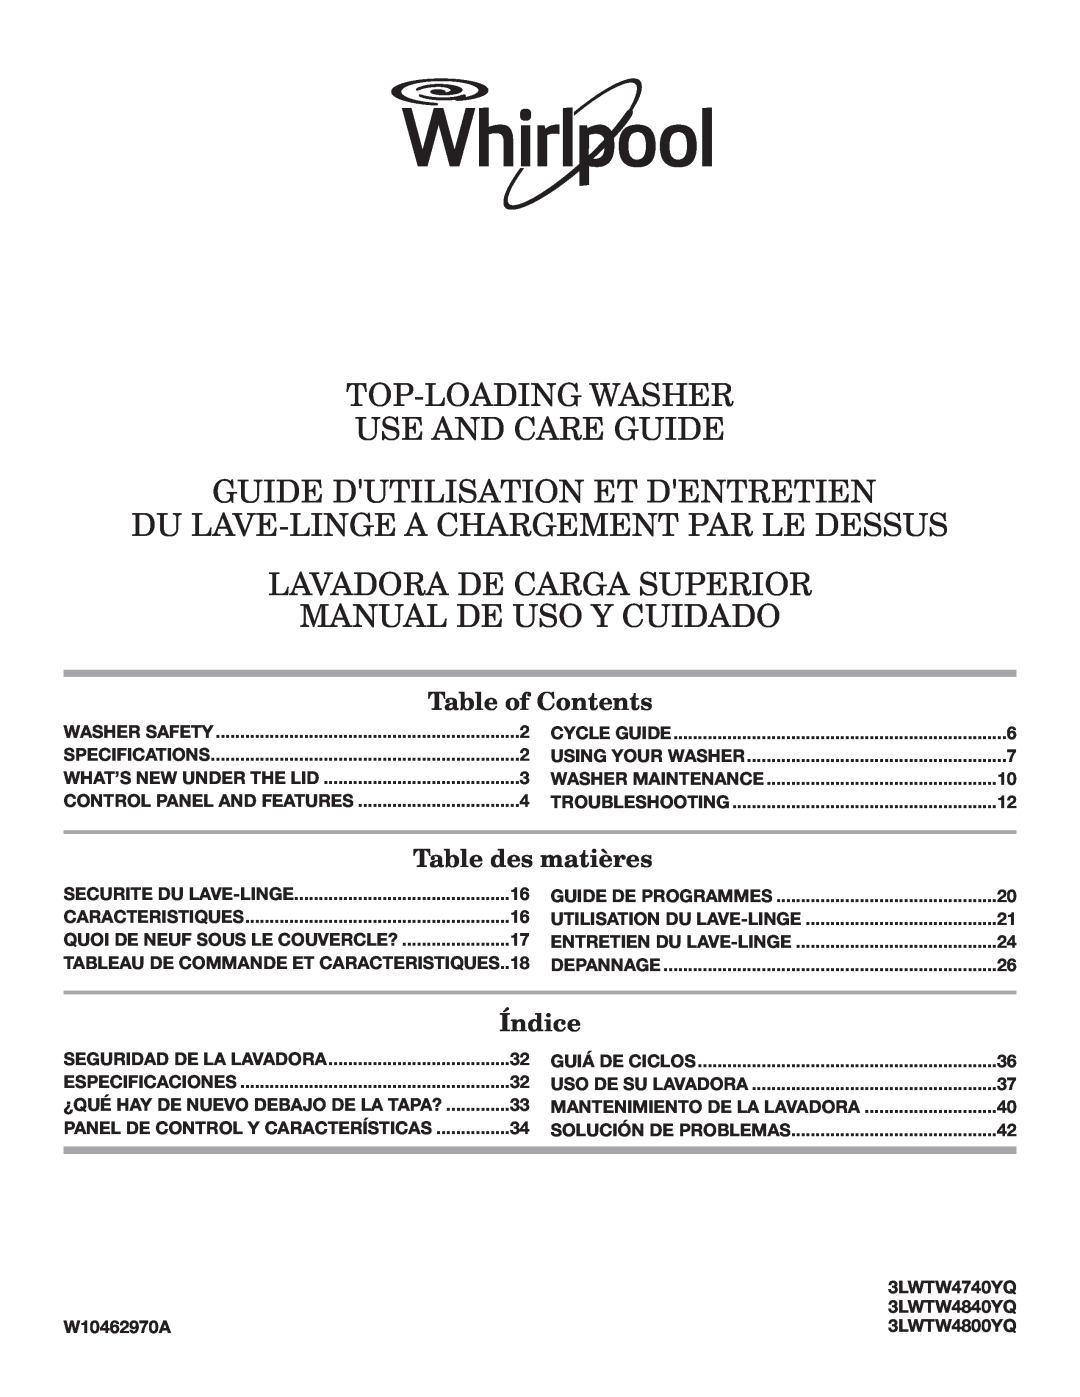 Maytag 3LWTW4800YQ specifications Table of Contents, Table des matières, Índice, Top-Loading Washer Use And Care Guide 